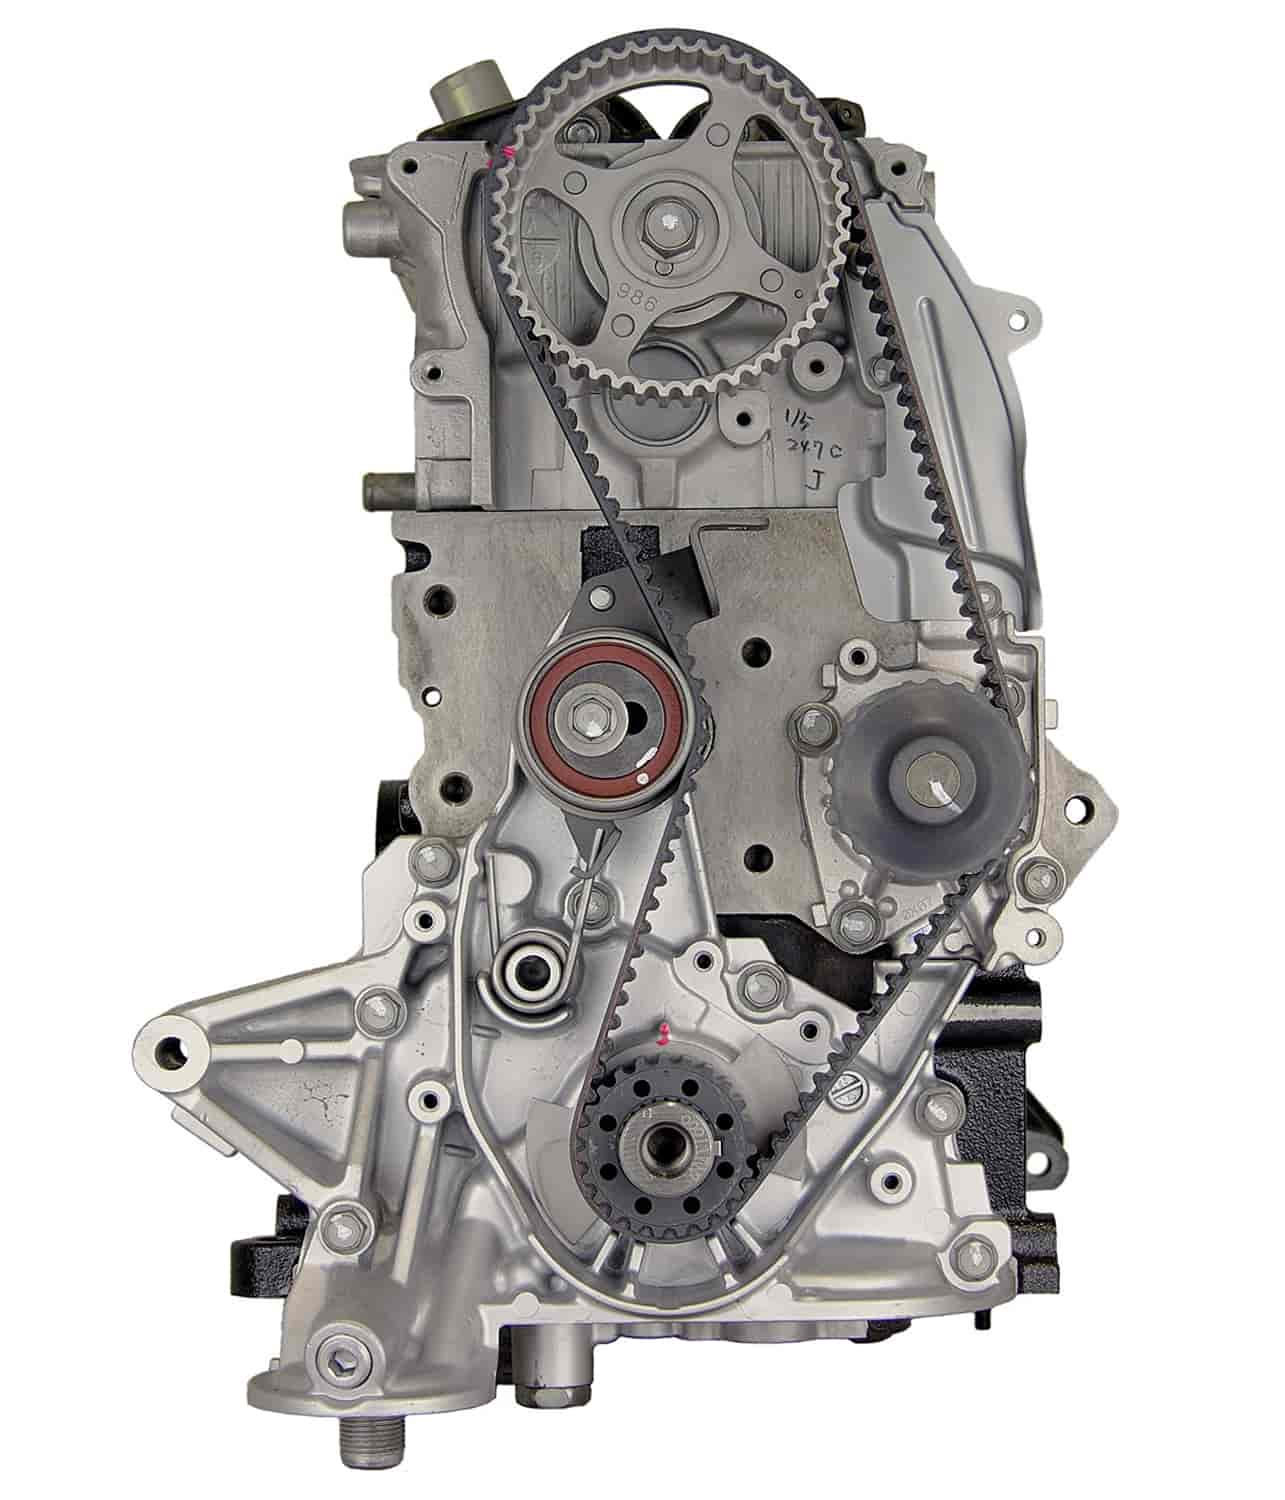 Remanufactured Crate Engine for 1997-2002 Mitsubishi Mirage with 1.8L L4